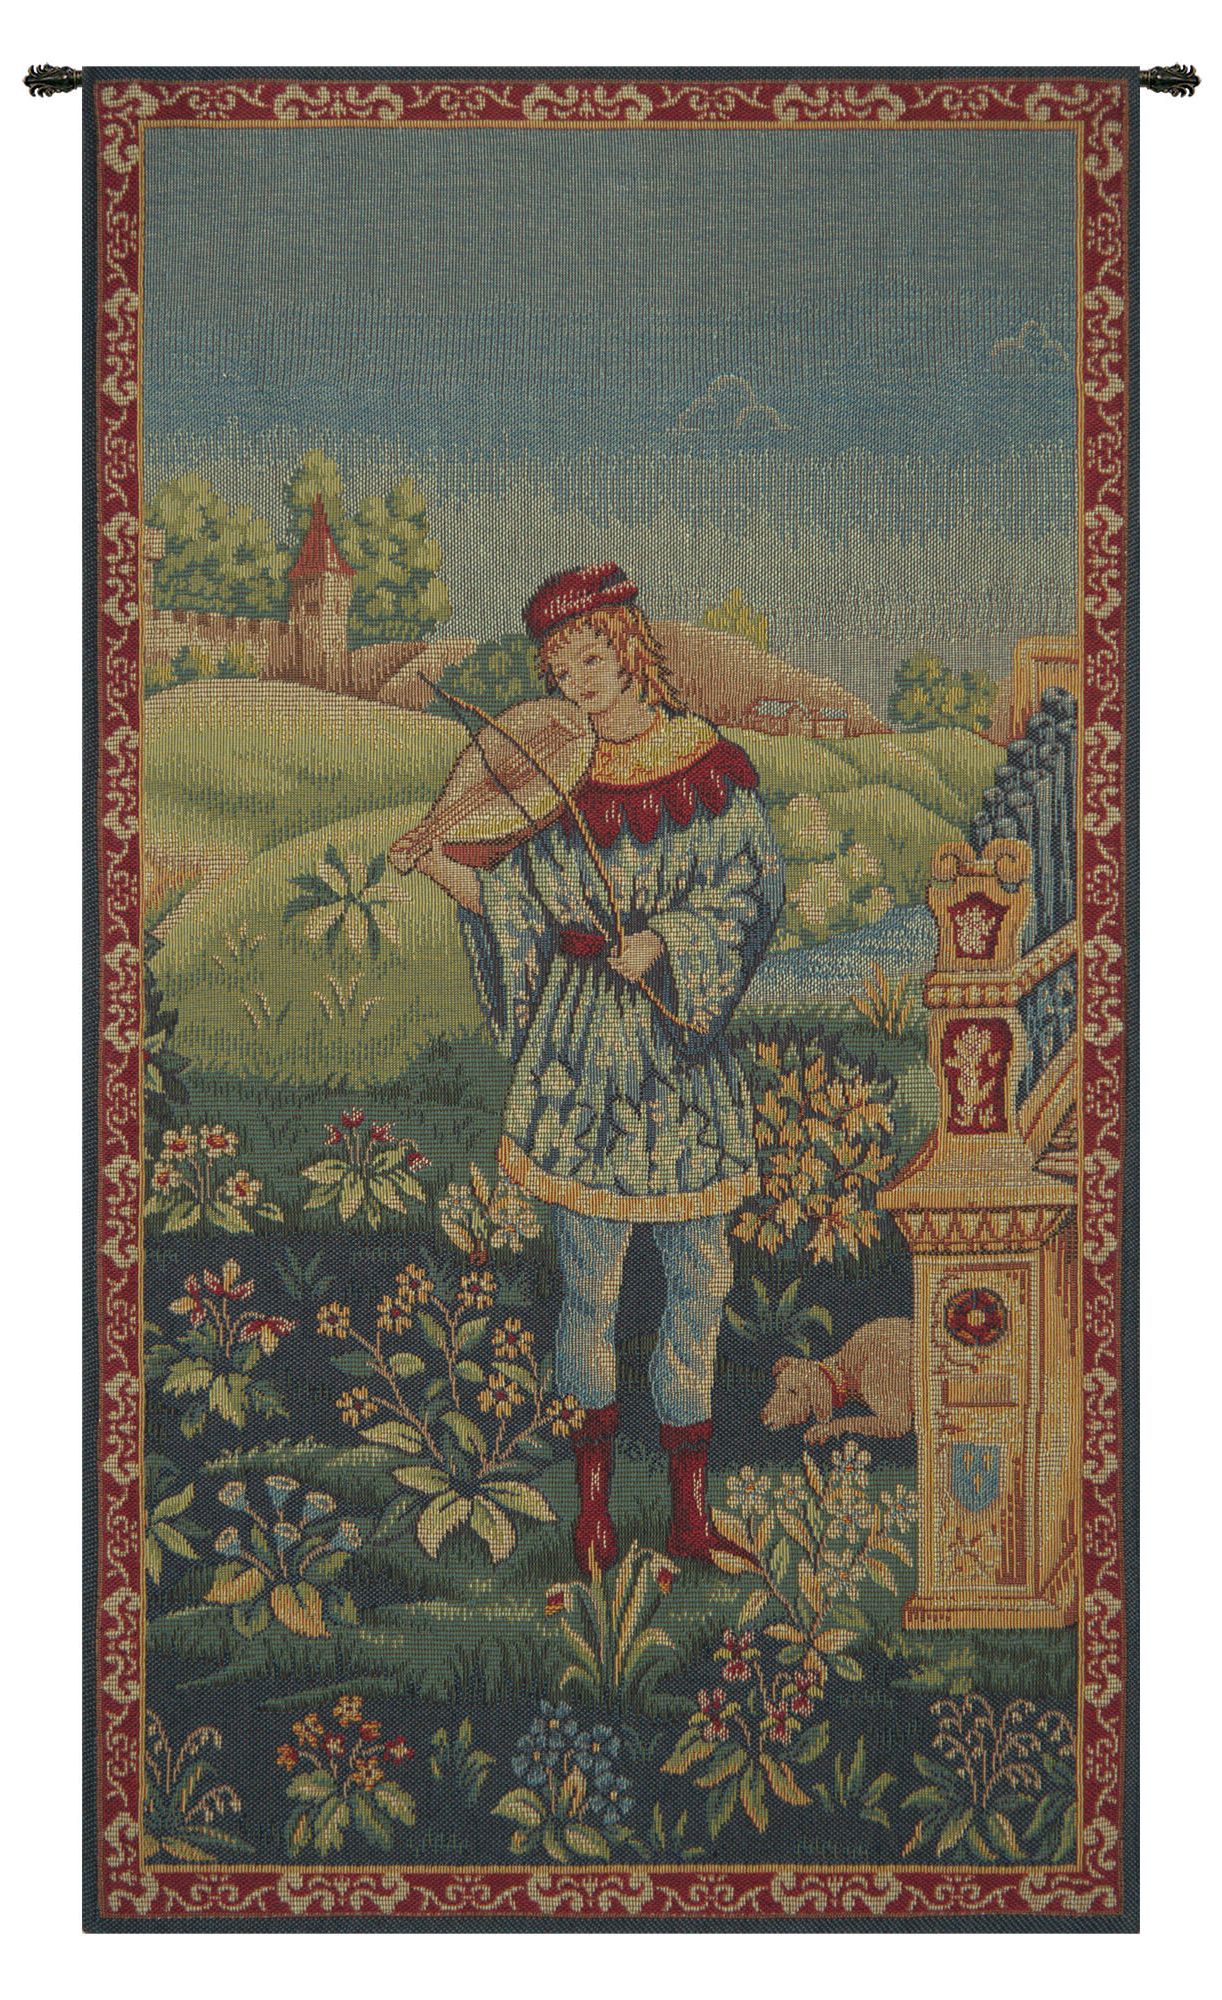 Most Popular Blended Fabric The Pomona Wall Hangings Pertaining To Blended Fabric Le Troubadour Tapestry (View 1 of 20)